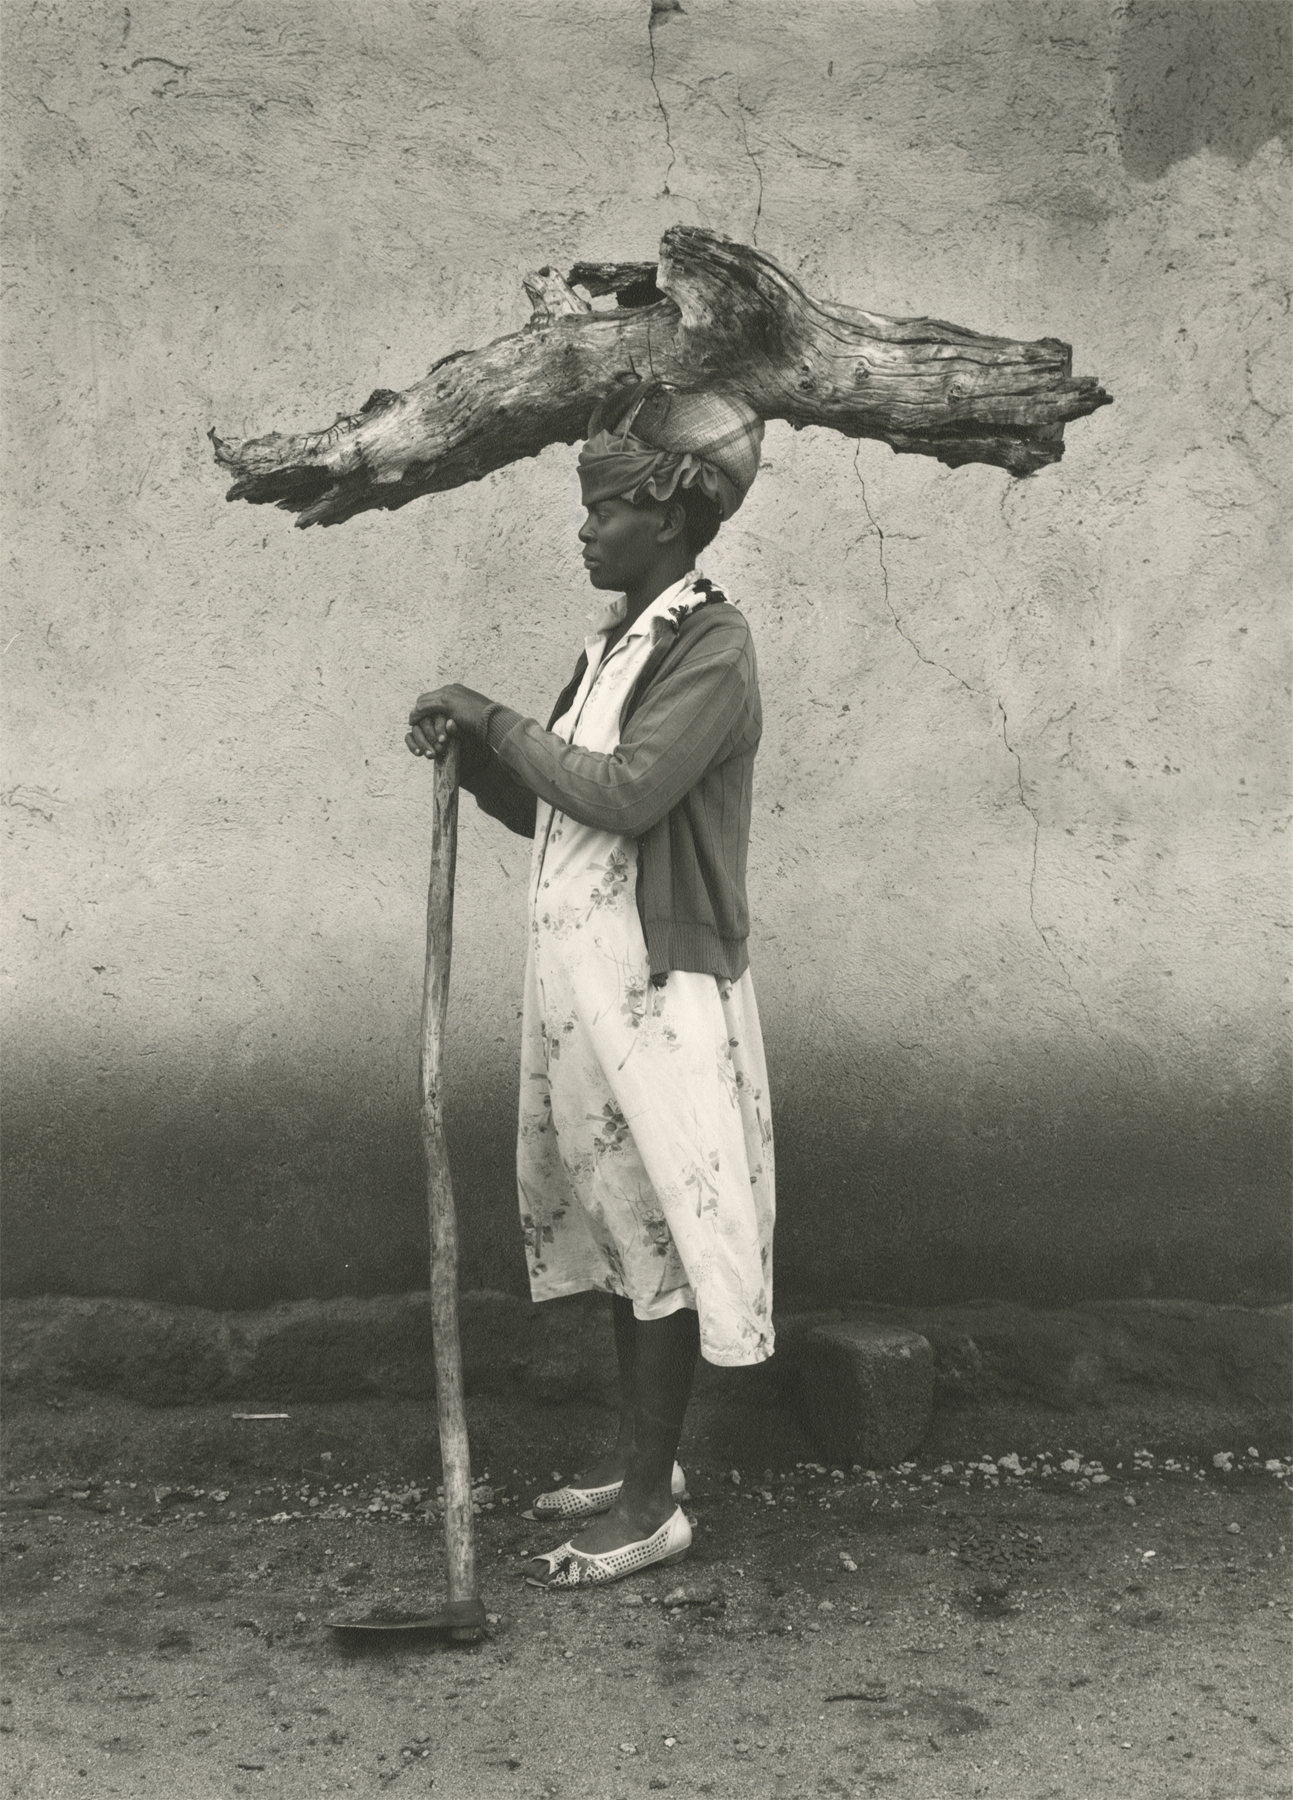 Nadav Kander  Lady with Log, South Africa, 1991  Gelatin silver print; printed 1991  14 3/8 x 10 3/8 inches